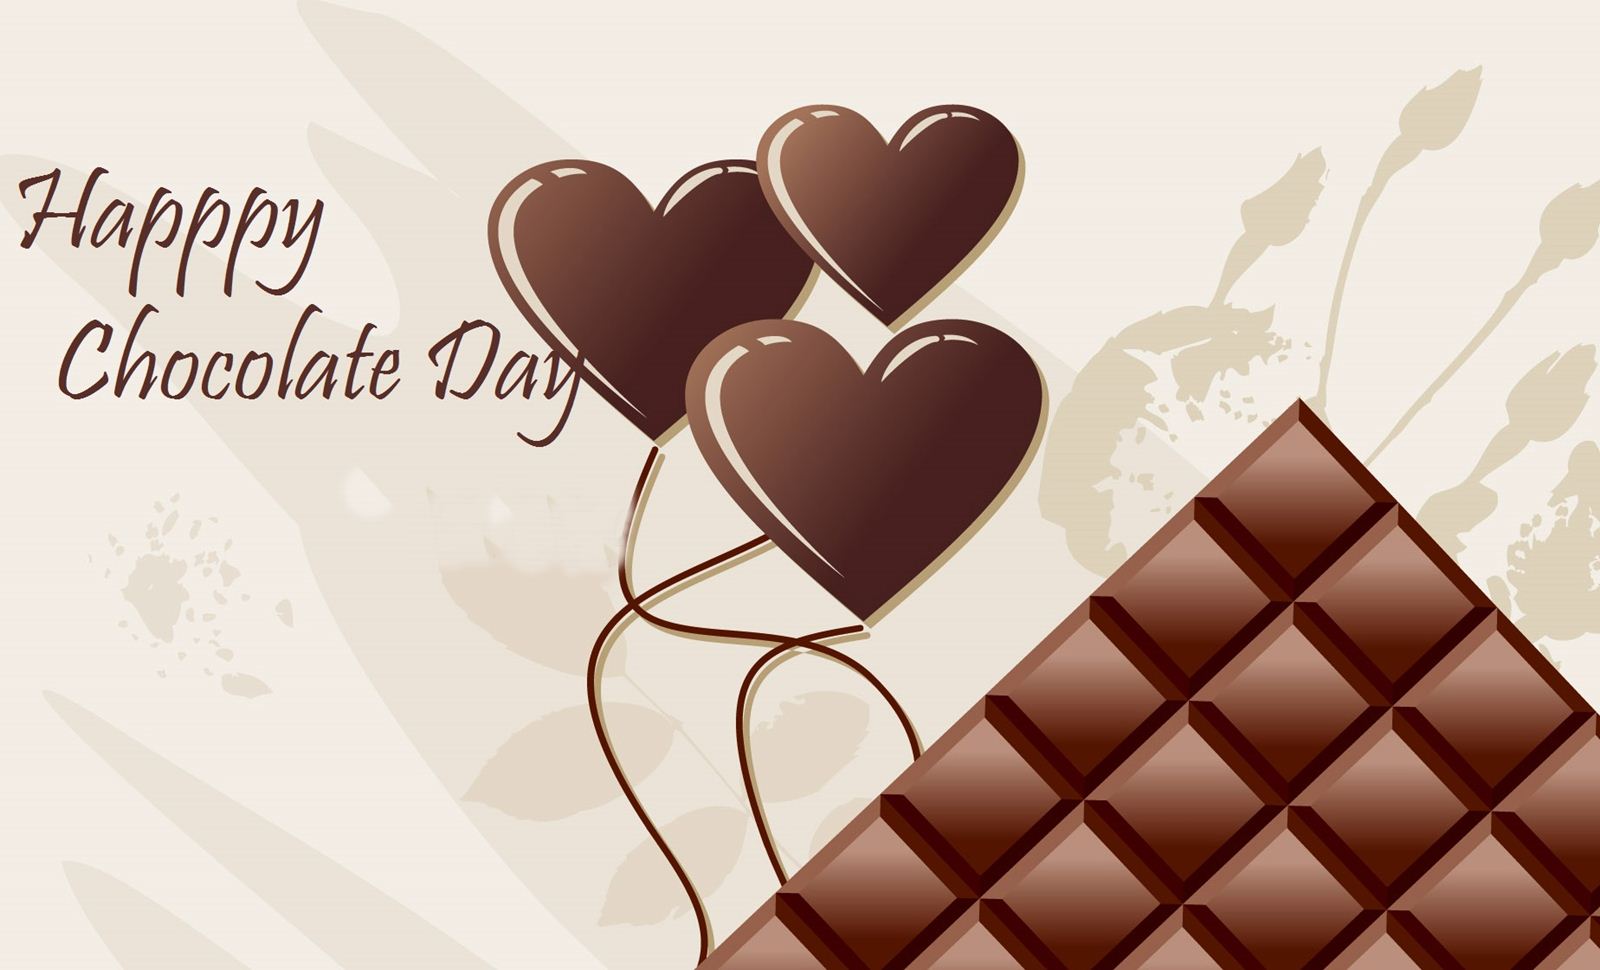 Happy Chocolate Day Wishes Quotes Dress Code Messages Images Facebook & Whatsapp Status